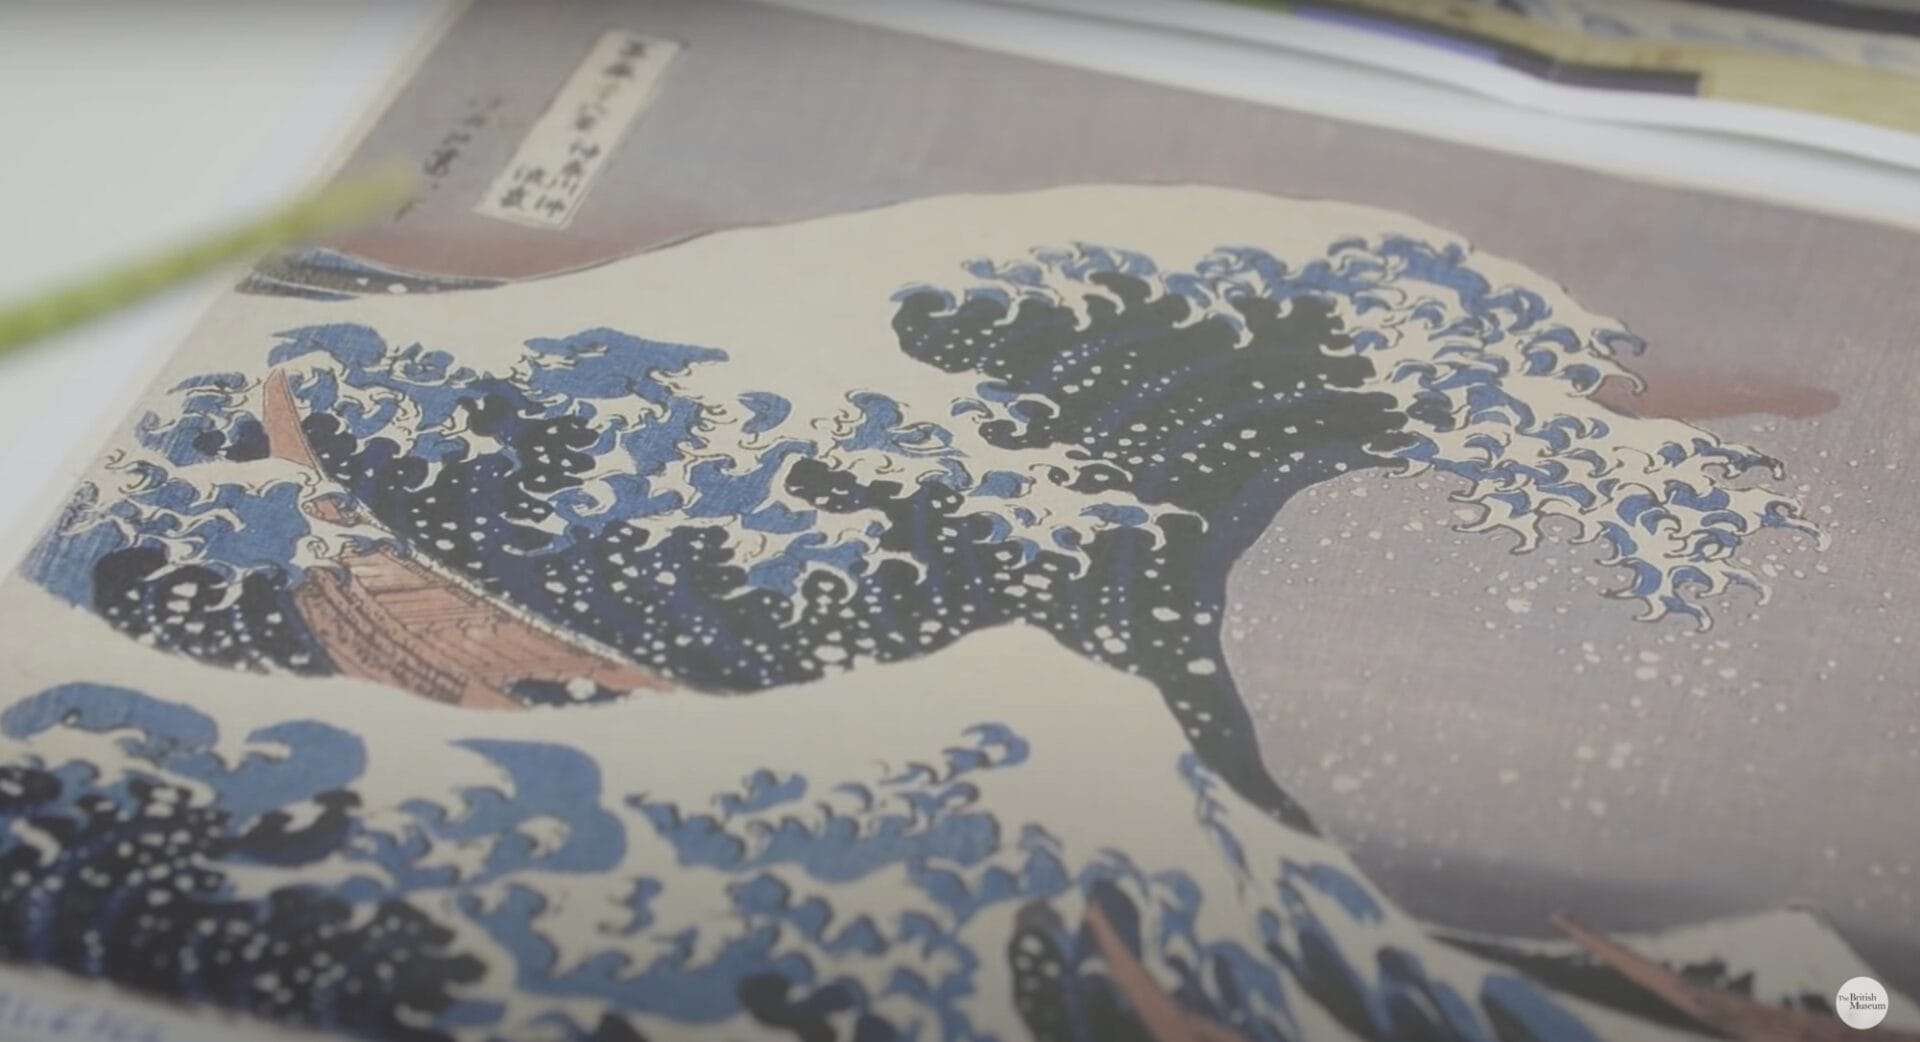 a still from a short documentary about Hokusai's "The Great Wave" print, showing a detail of the wave